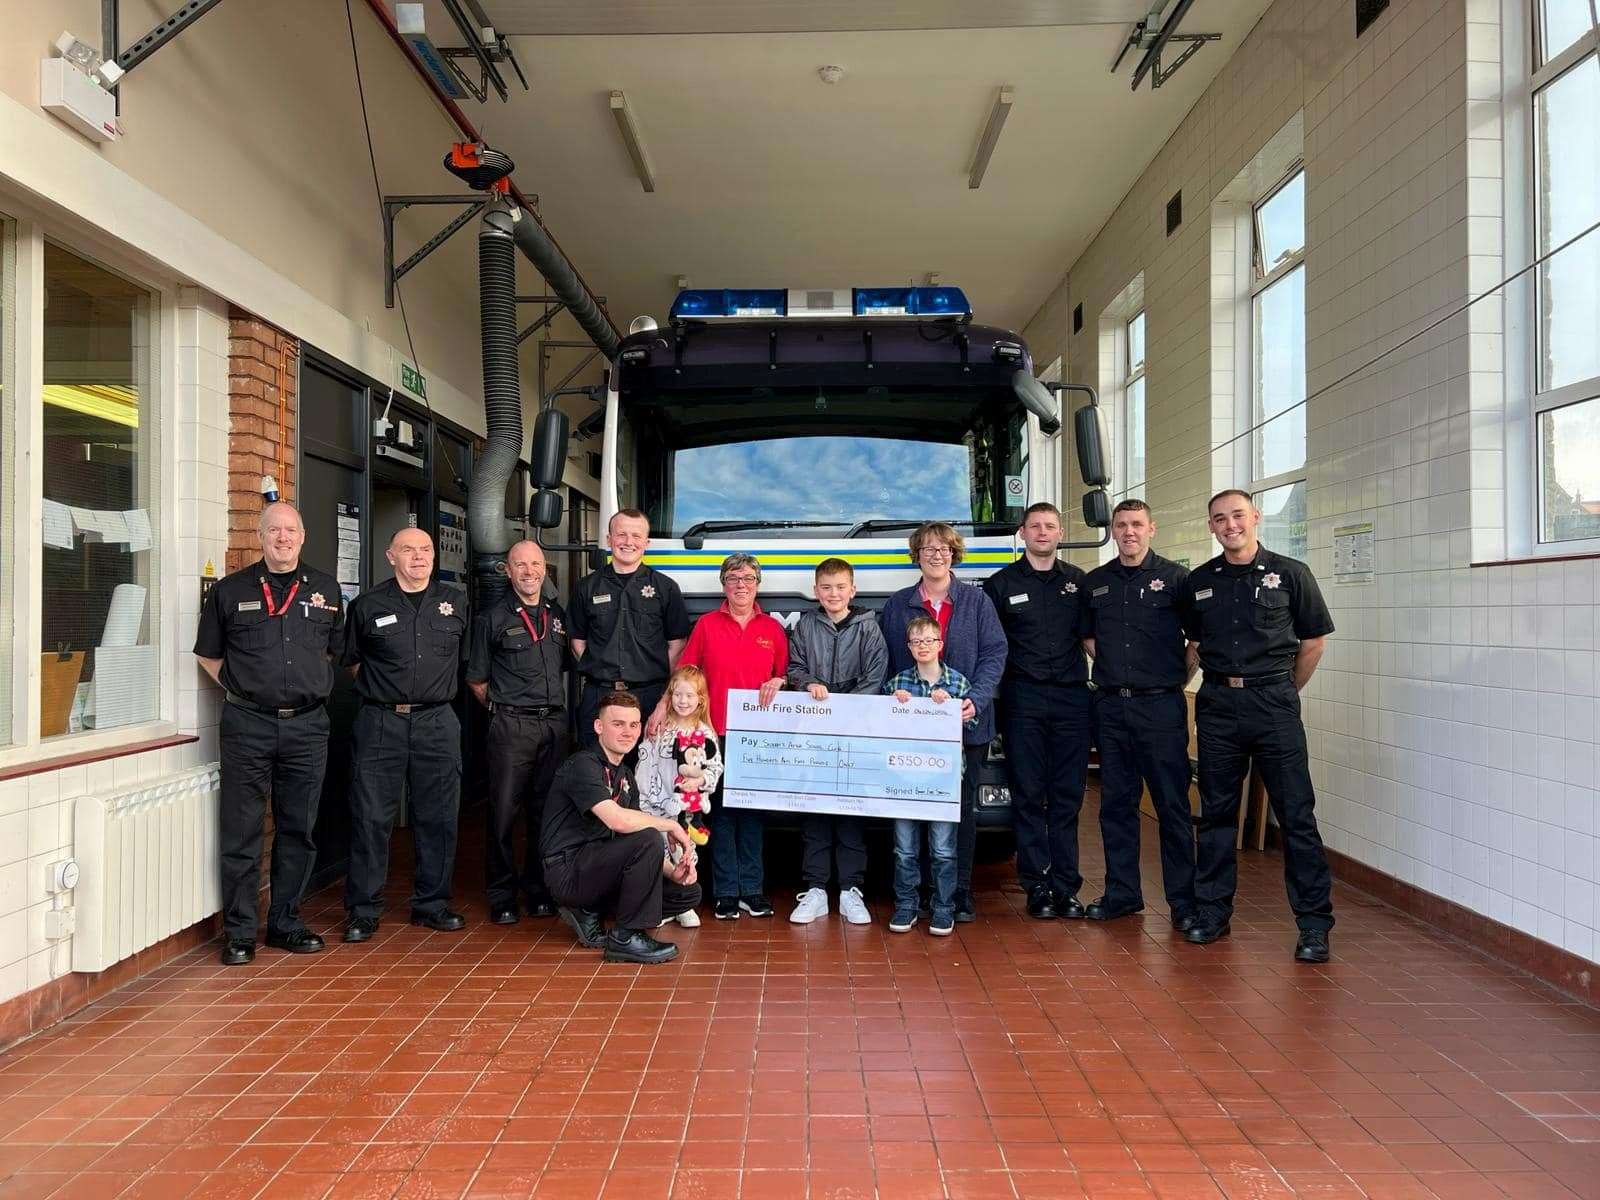 Banff Fire Station presented a donation to Scooby's After School Club.